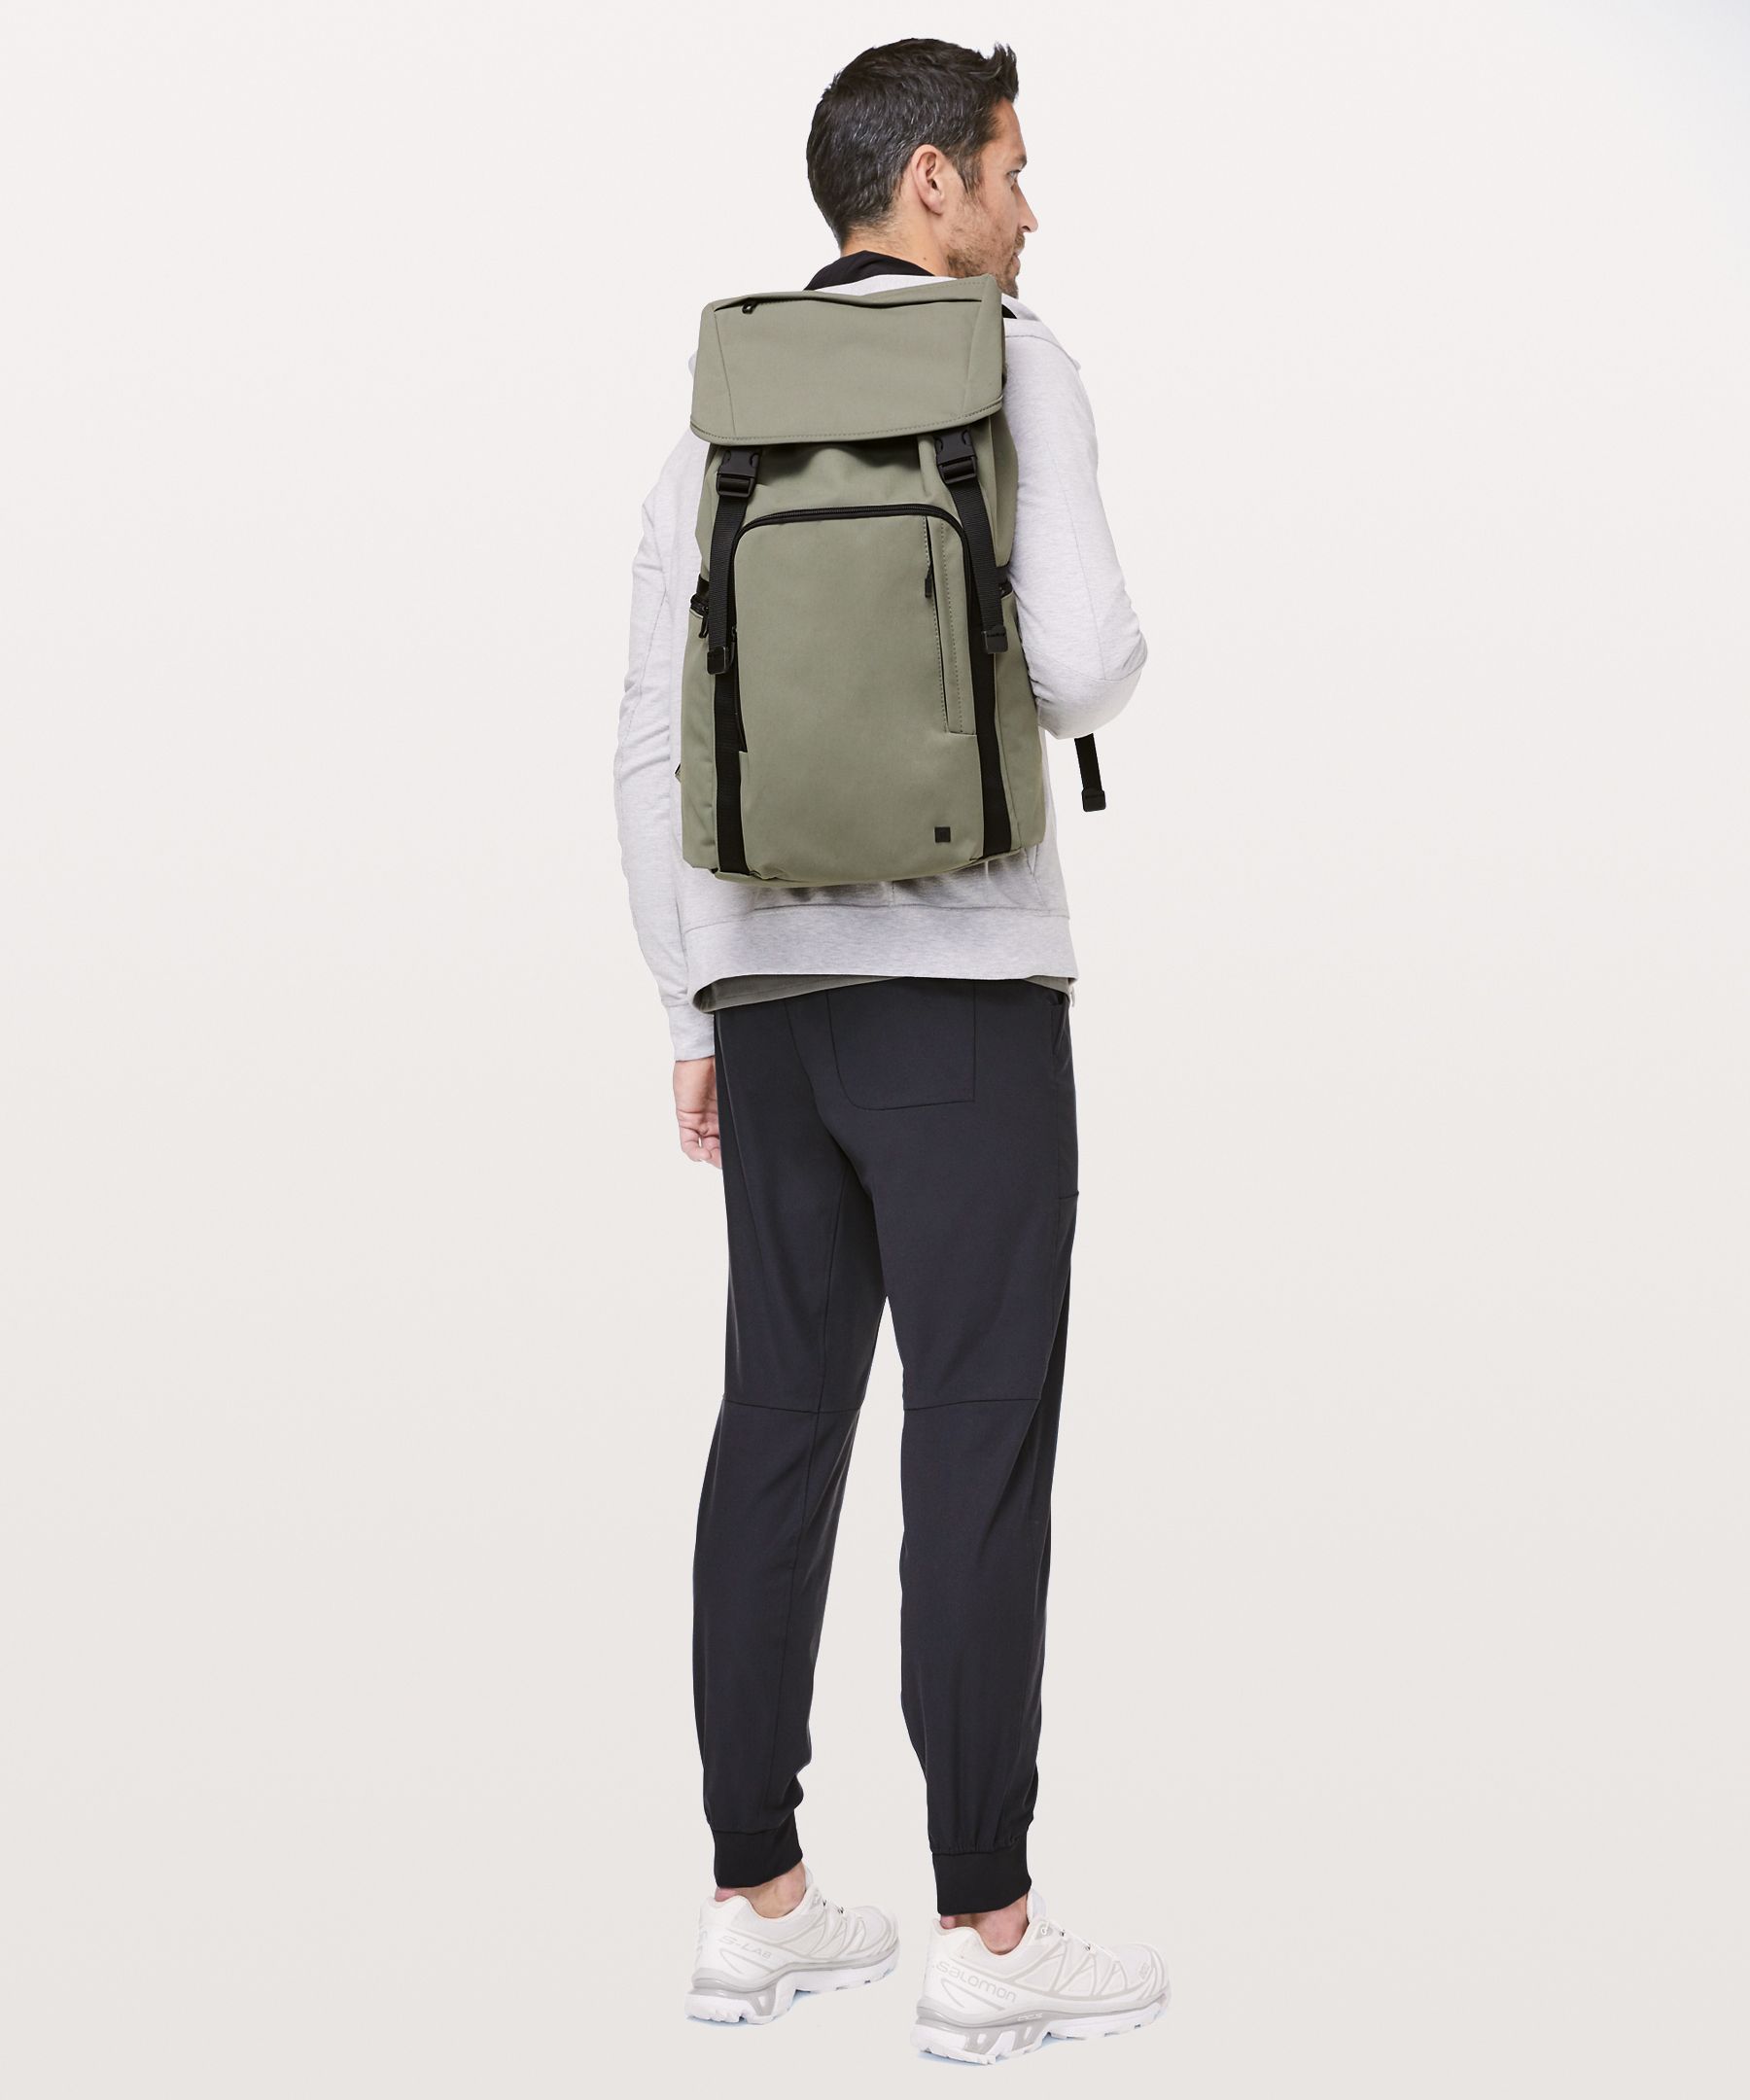 lululemon command the day backpack